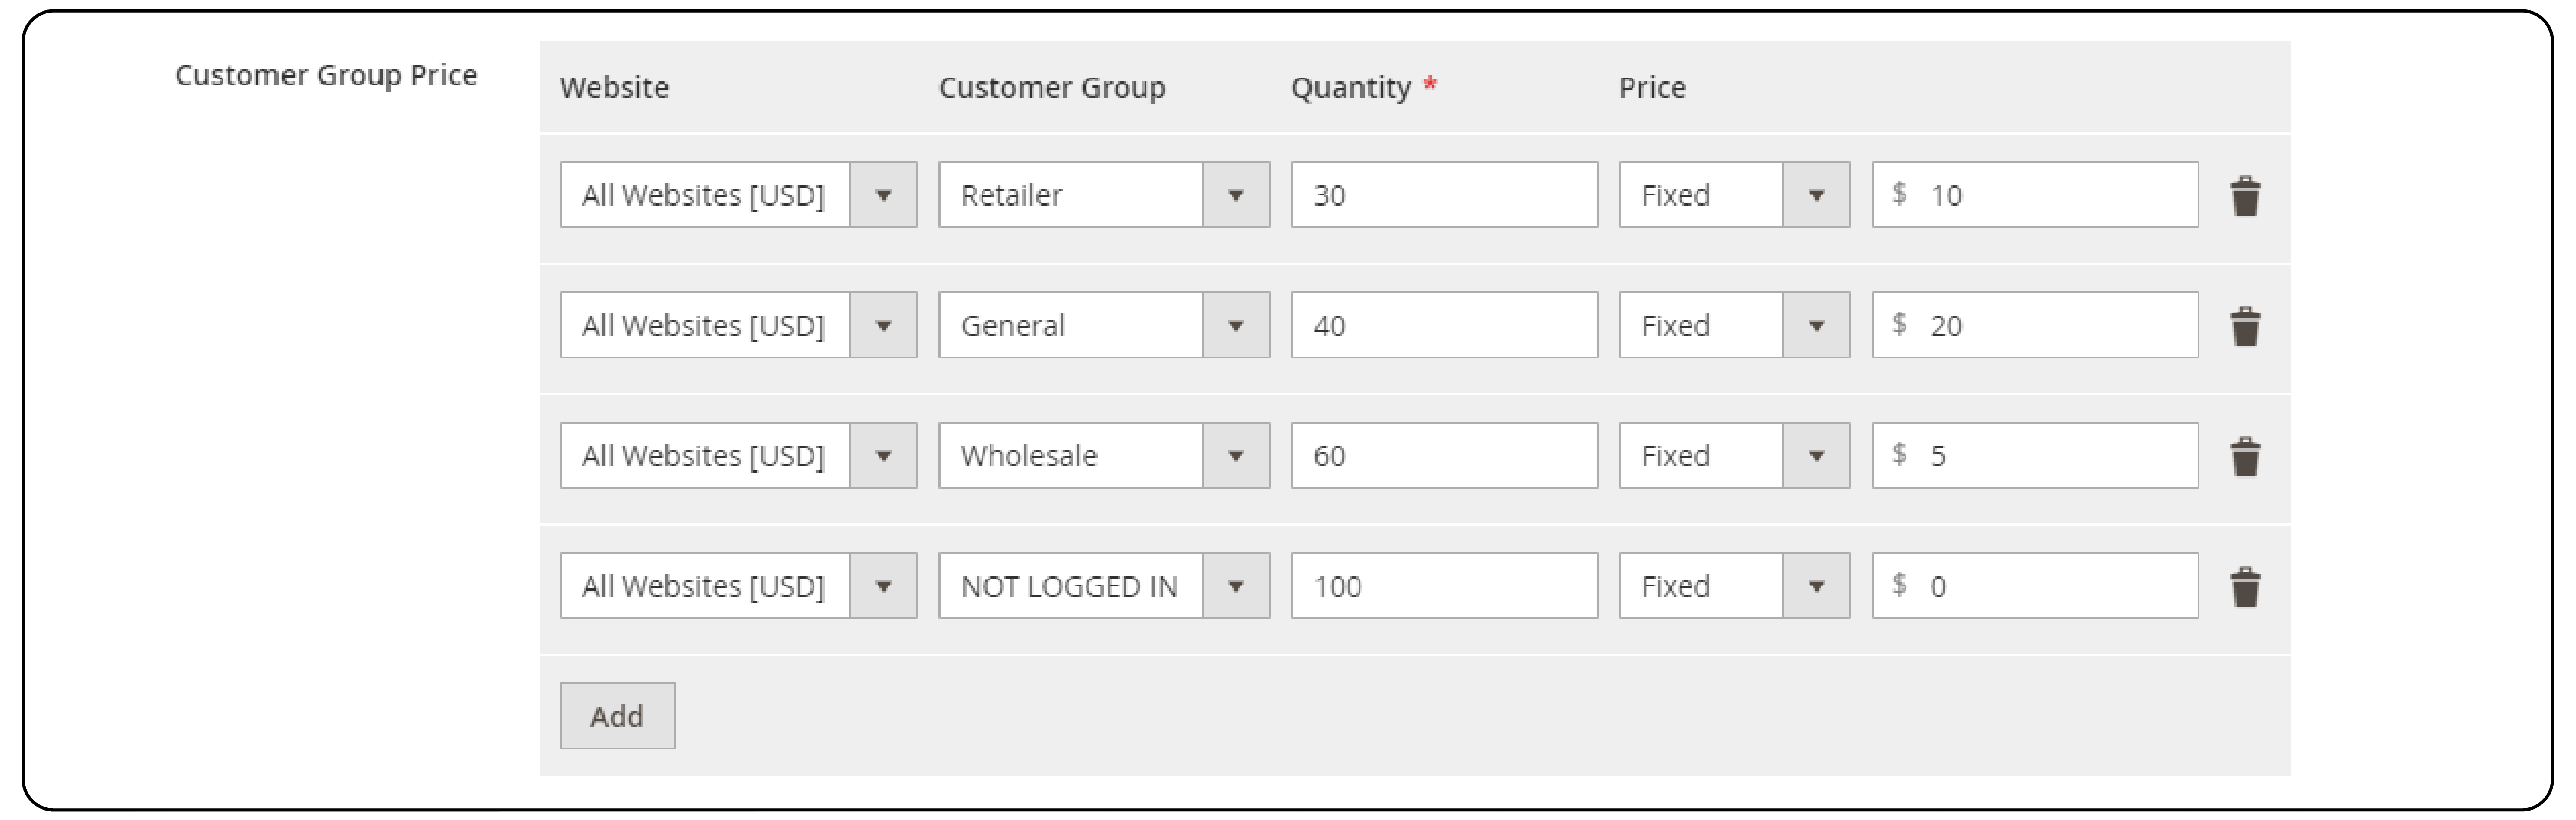 Configuring advanced tier pricing options for different customer groups in Magento 2